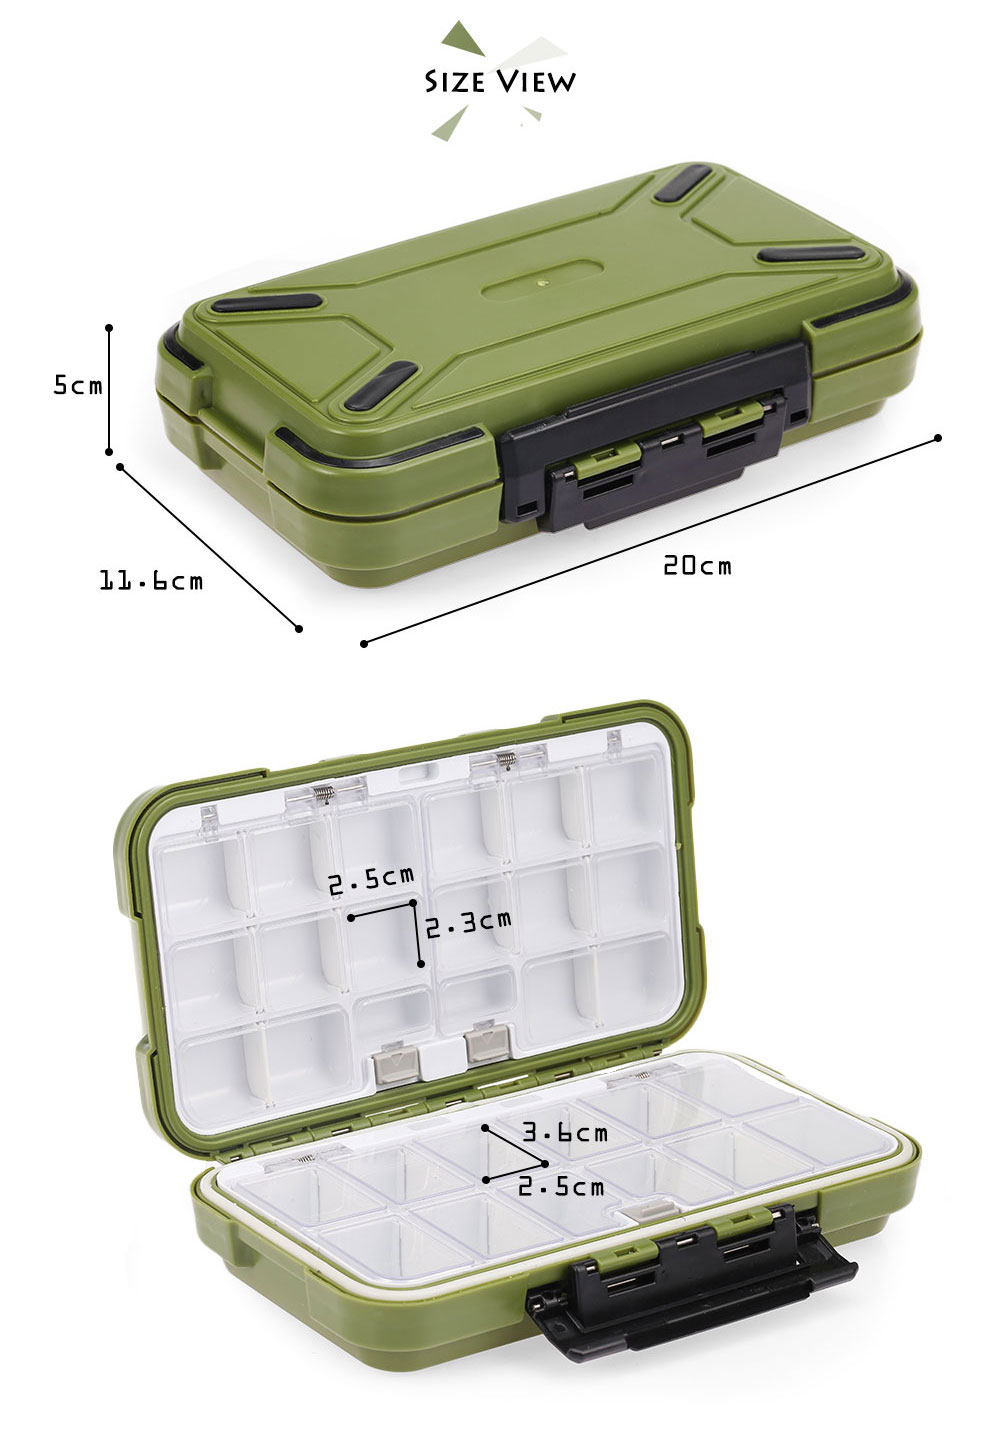 Professional Fishing Tackle Boxing Double Layer 30 Compartments Lure Angling Box